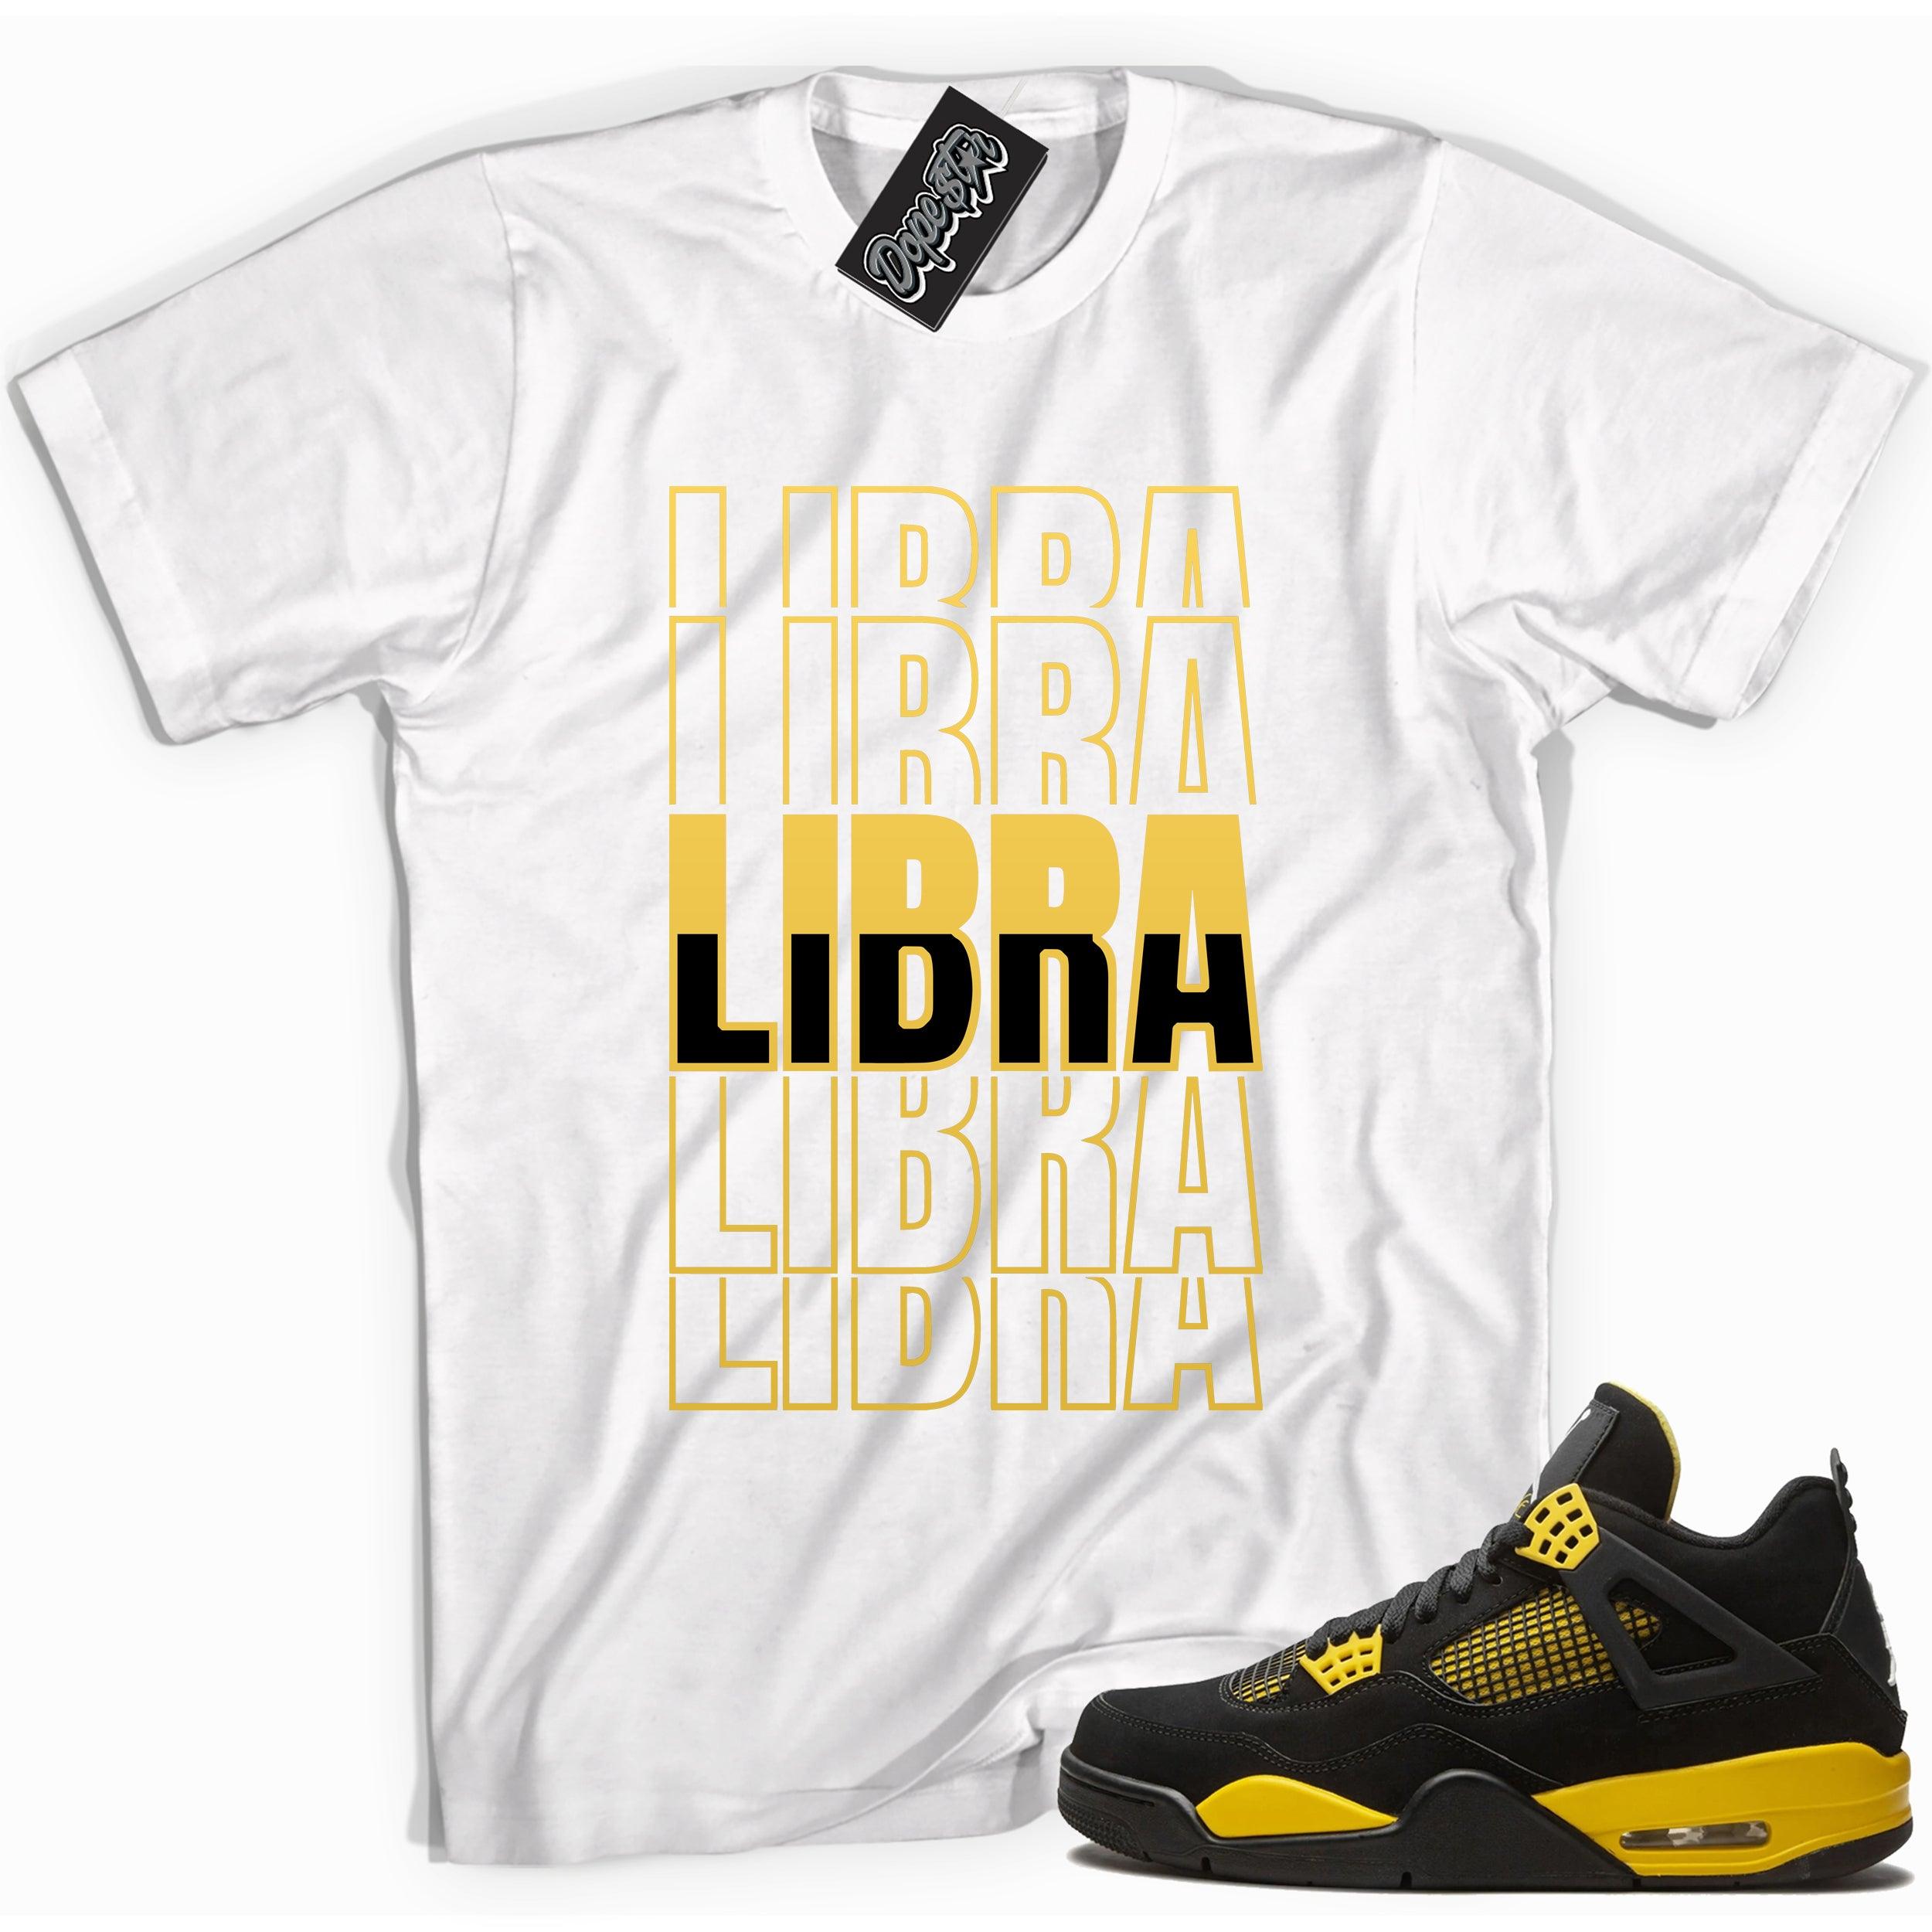 Cool white graphic tee with 'libra' print, that perfectly matches Air Jordan 4 Thunder sneakers